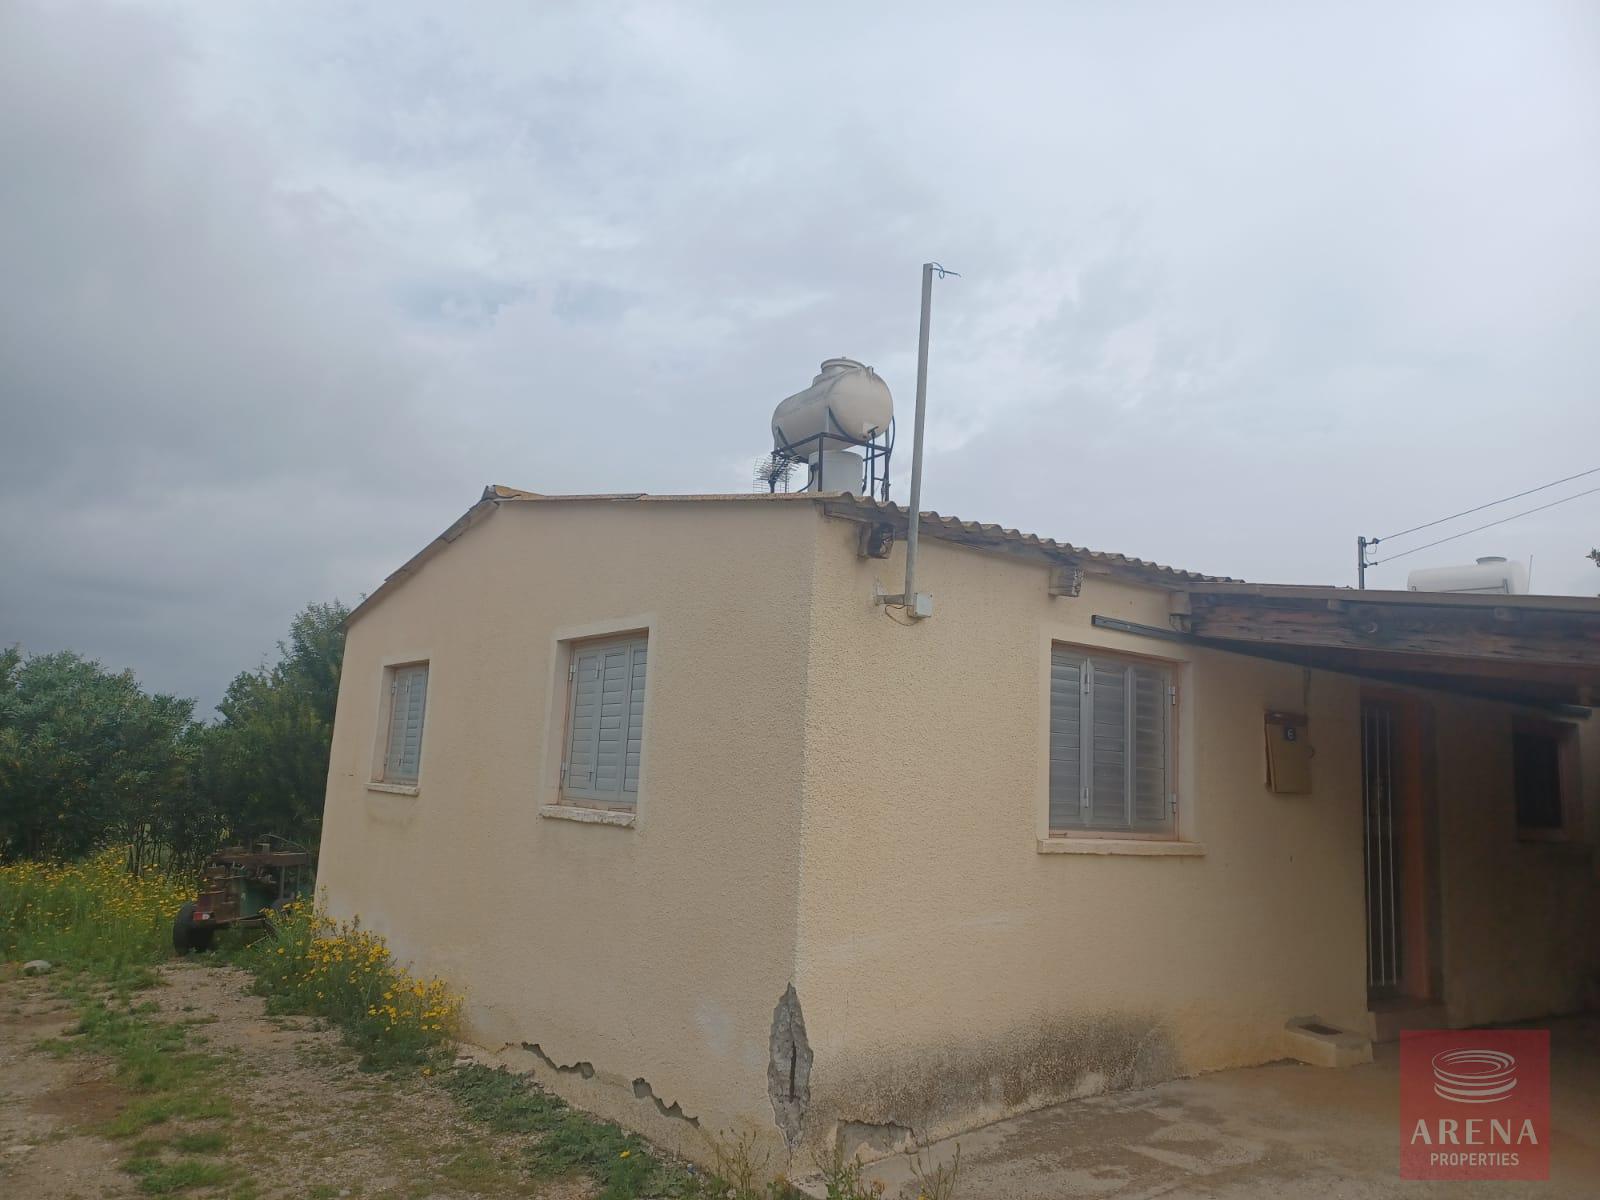 2 BED BUNGALOW IN frenaros for sale